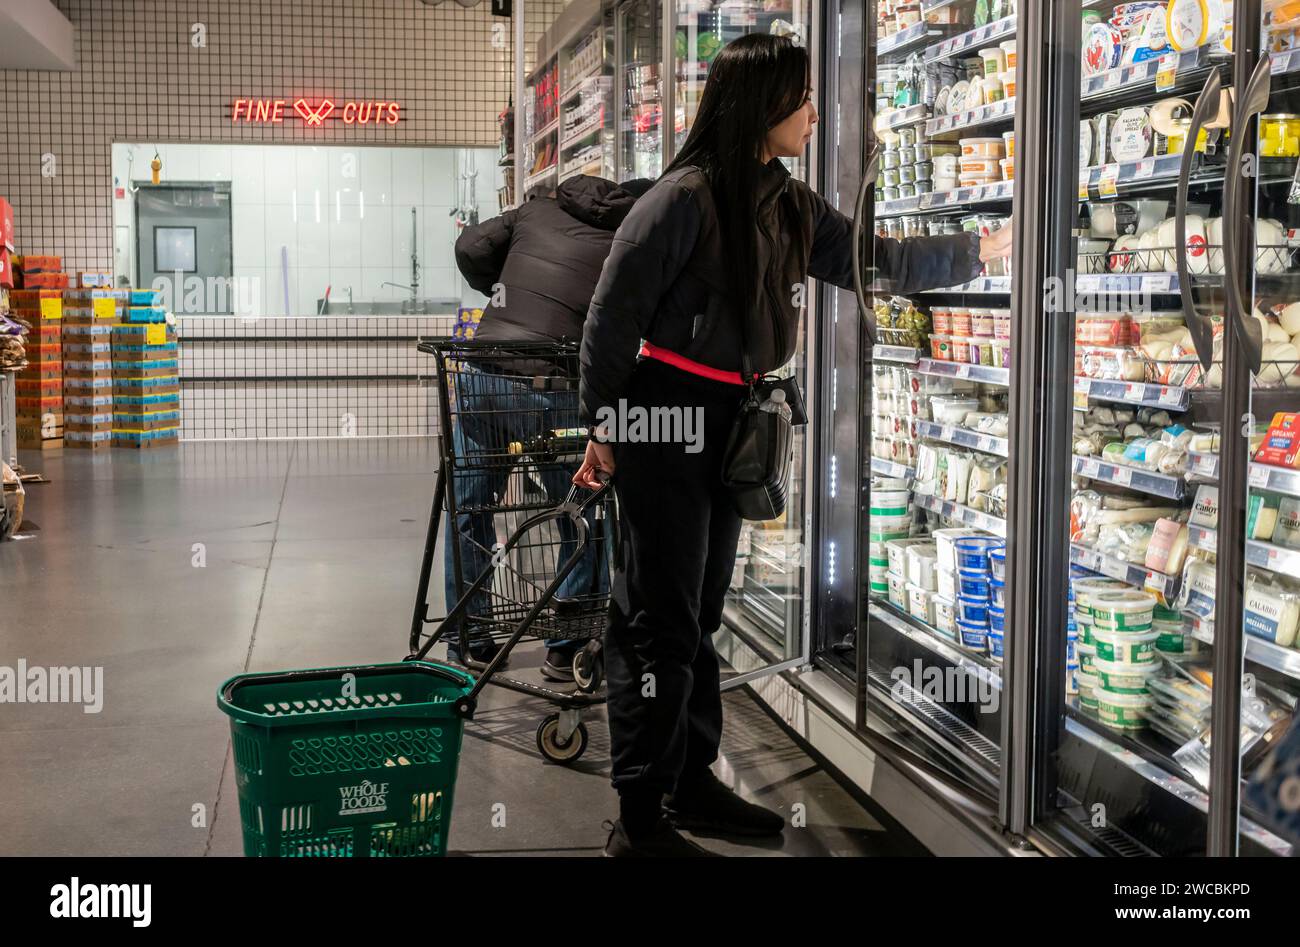 Shopping In A Whole Foods Market Supermarket In New York On Wednesday January 10 2024 Richard B Levine 2WCBKPD 